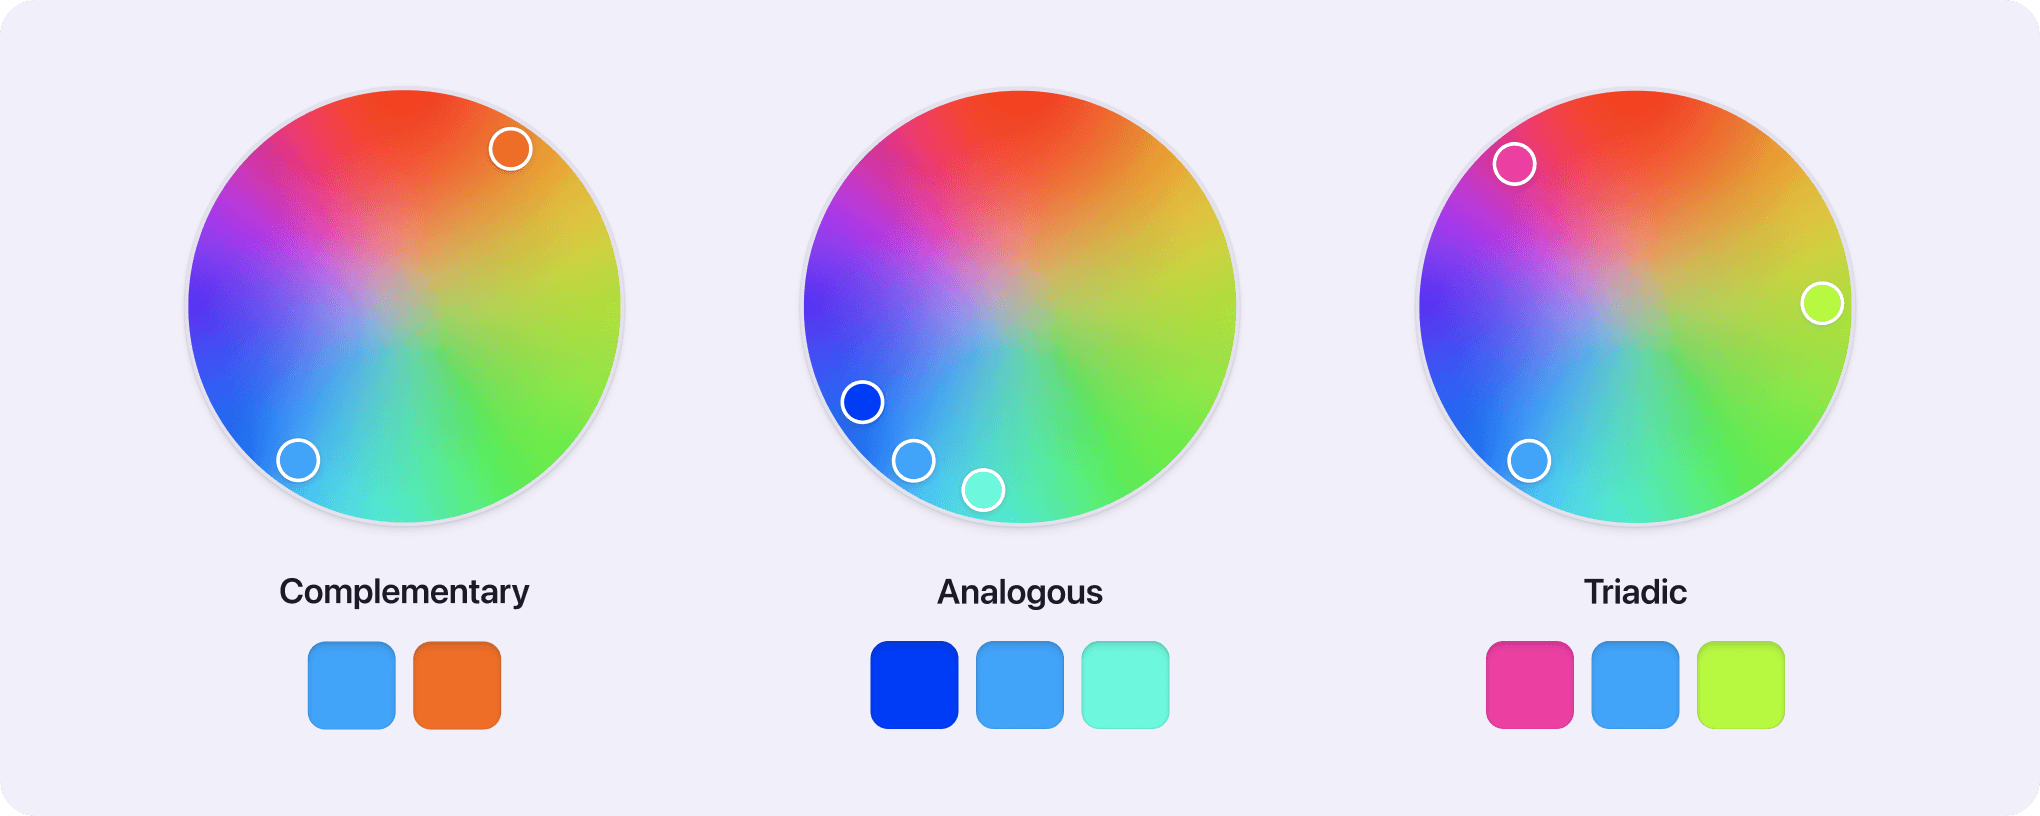 Complementary, Analogous, and Triadic color schemes